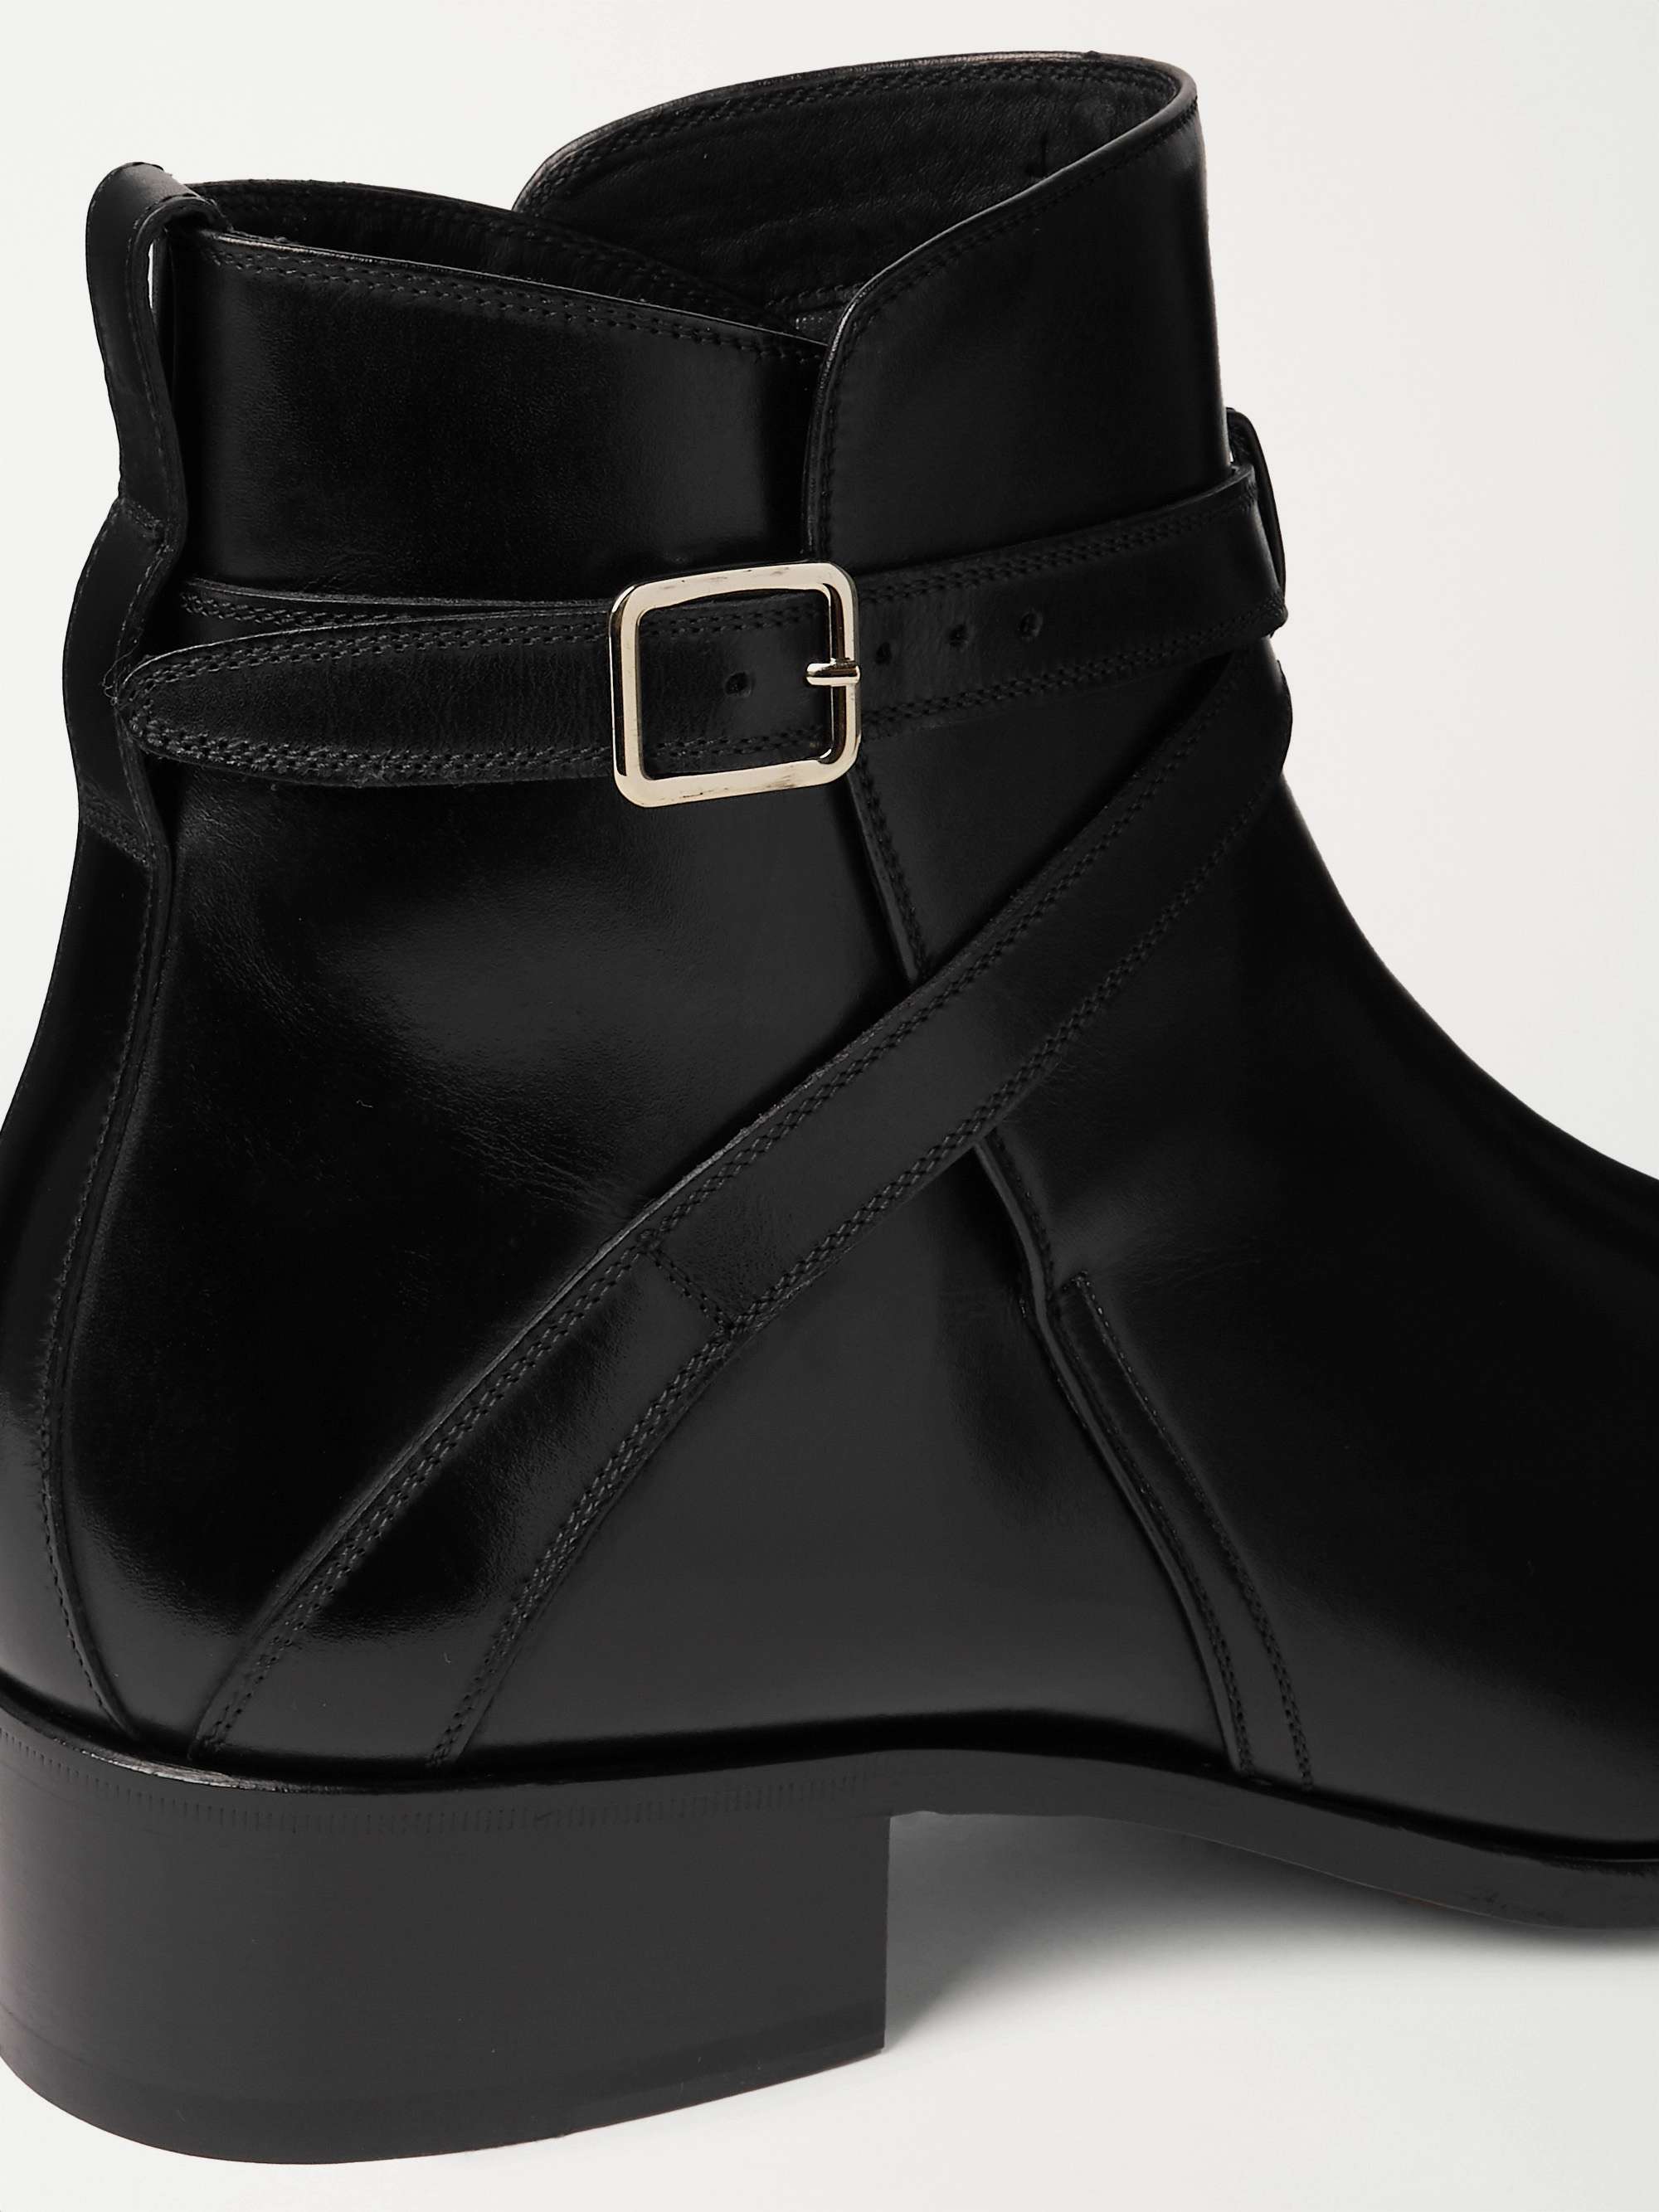 TOM FORD Rochester Leather Chelsea Boots